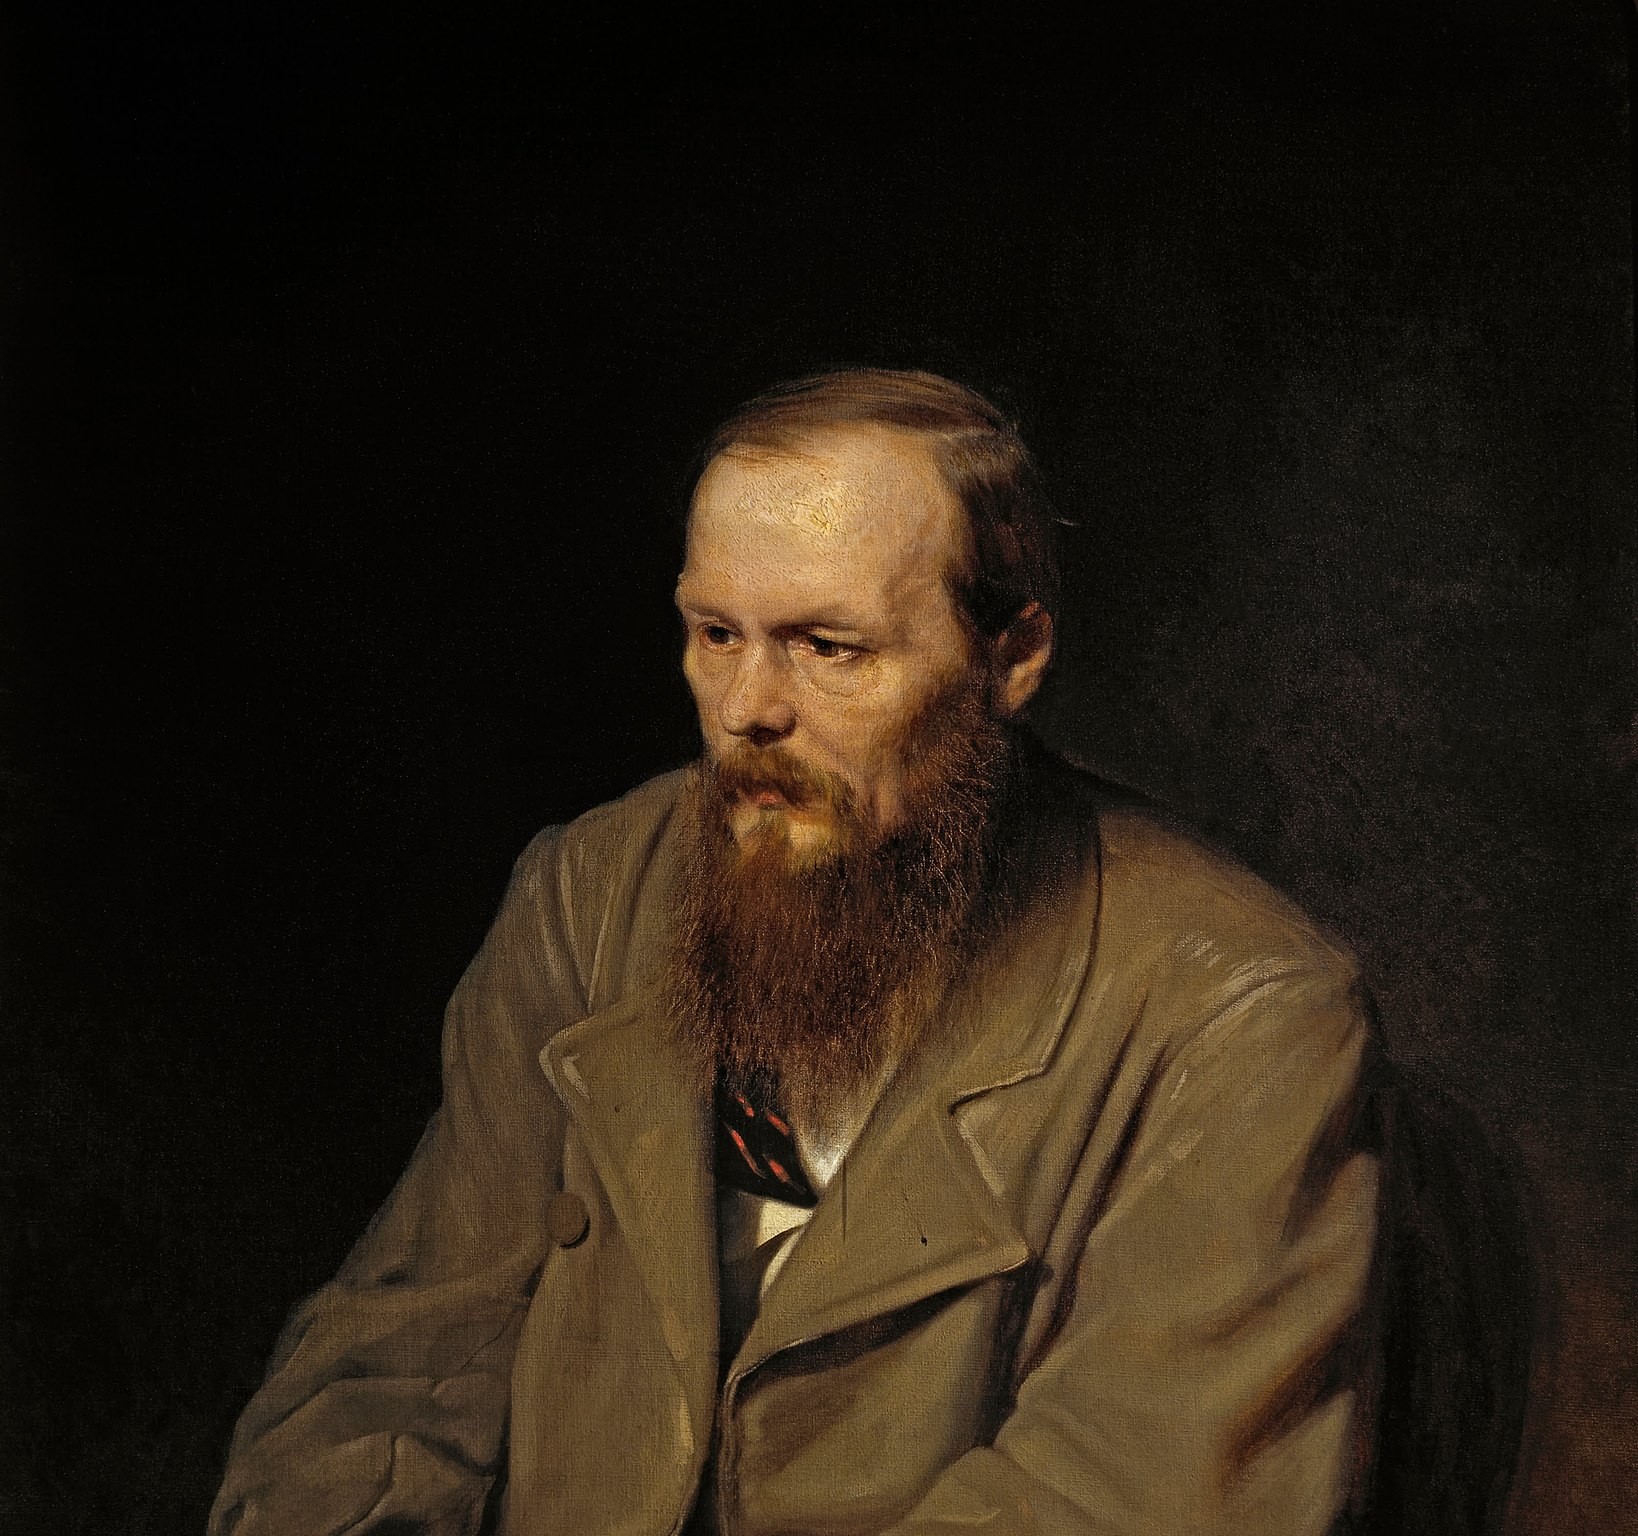 How did Dostoevsky know?